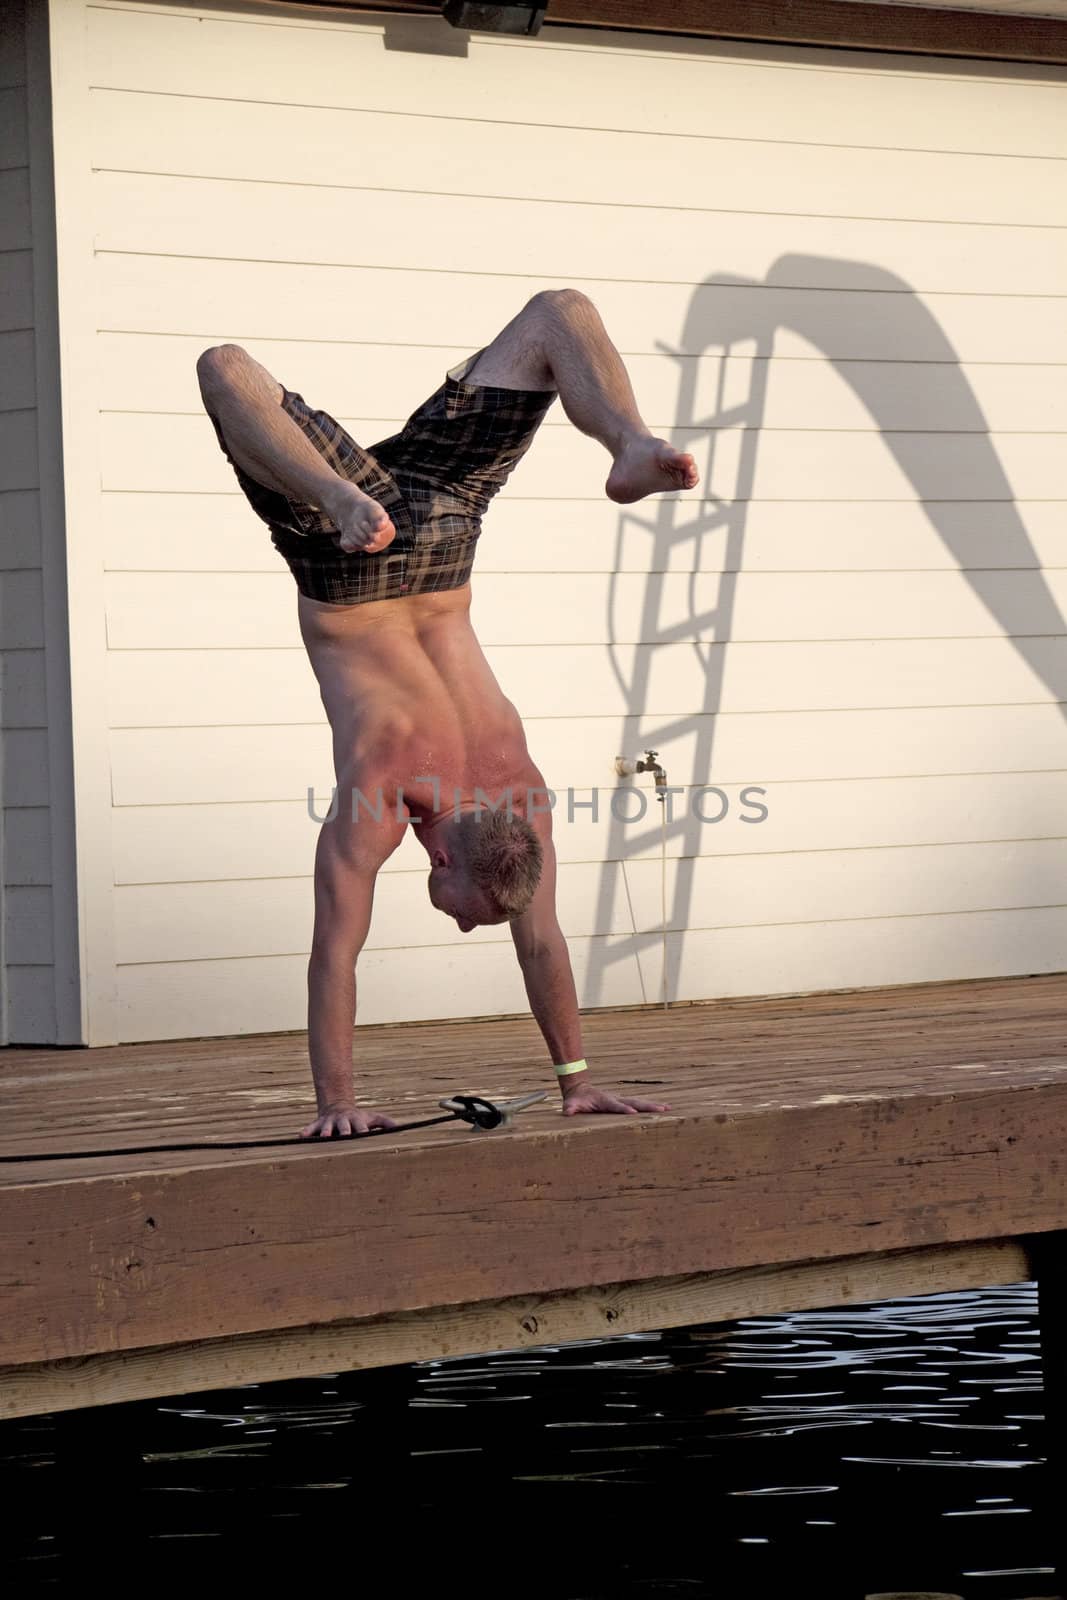 A man doing a handstand on a dock